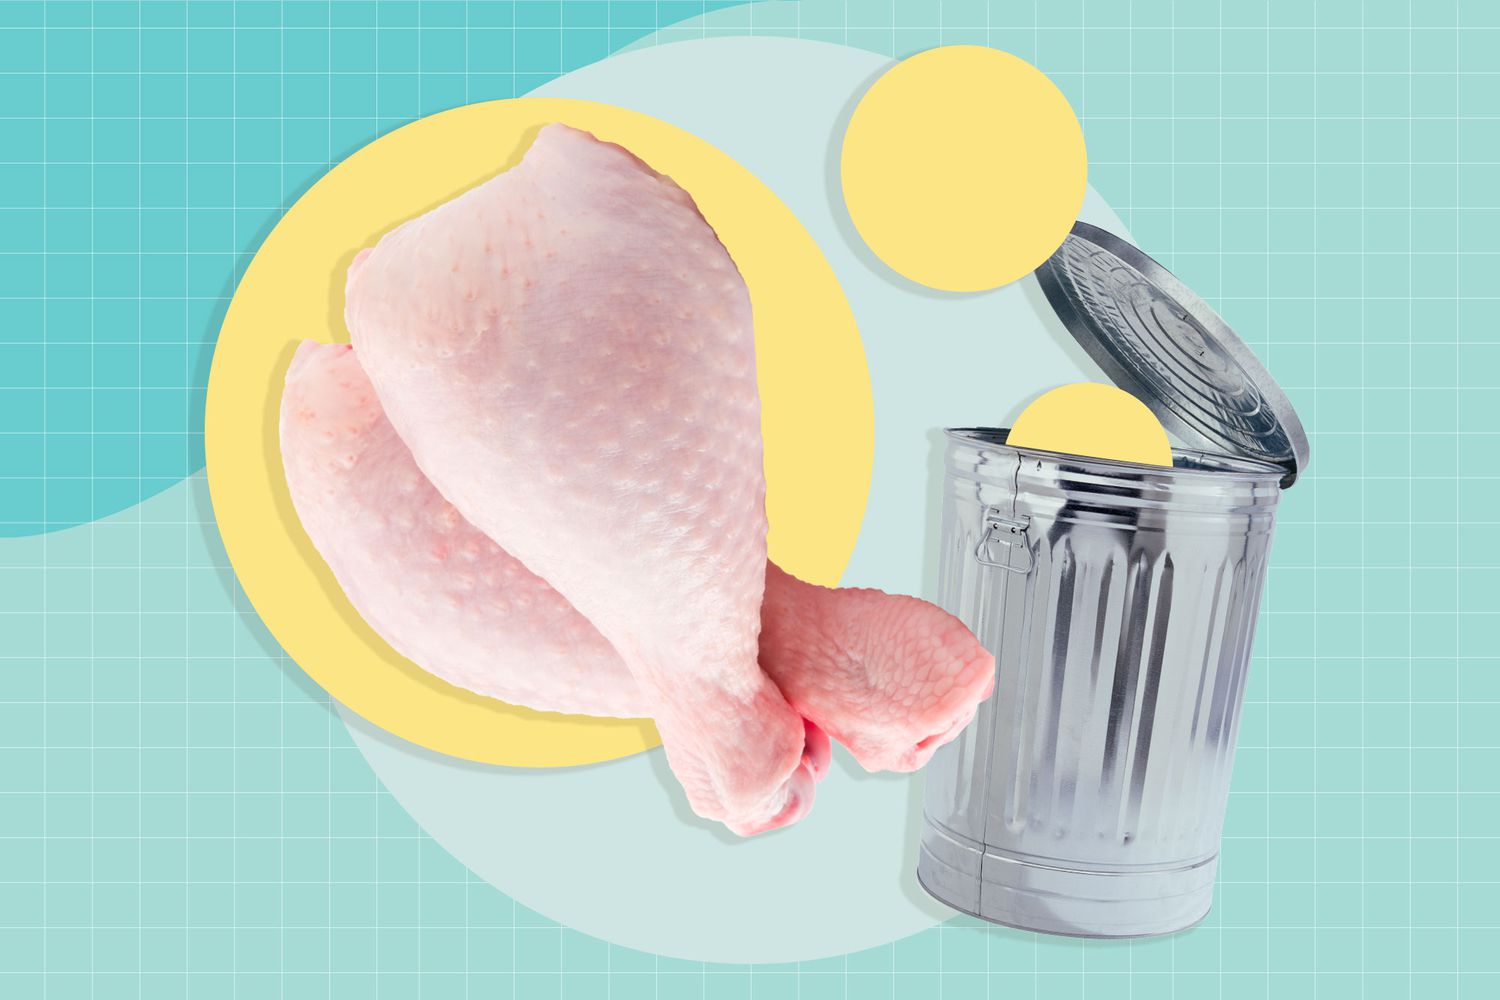 chicken legs and trash can on designed background